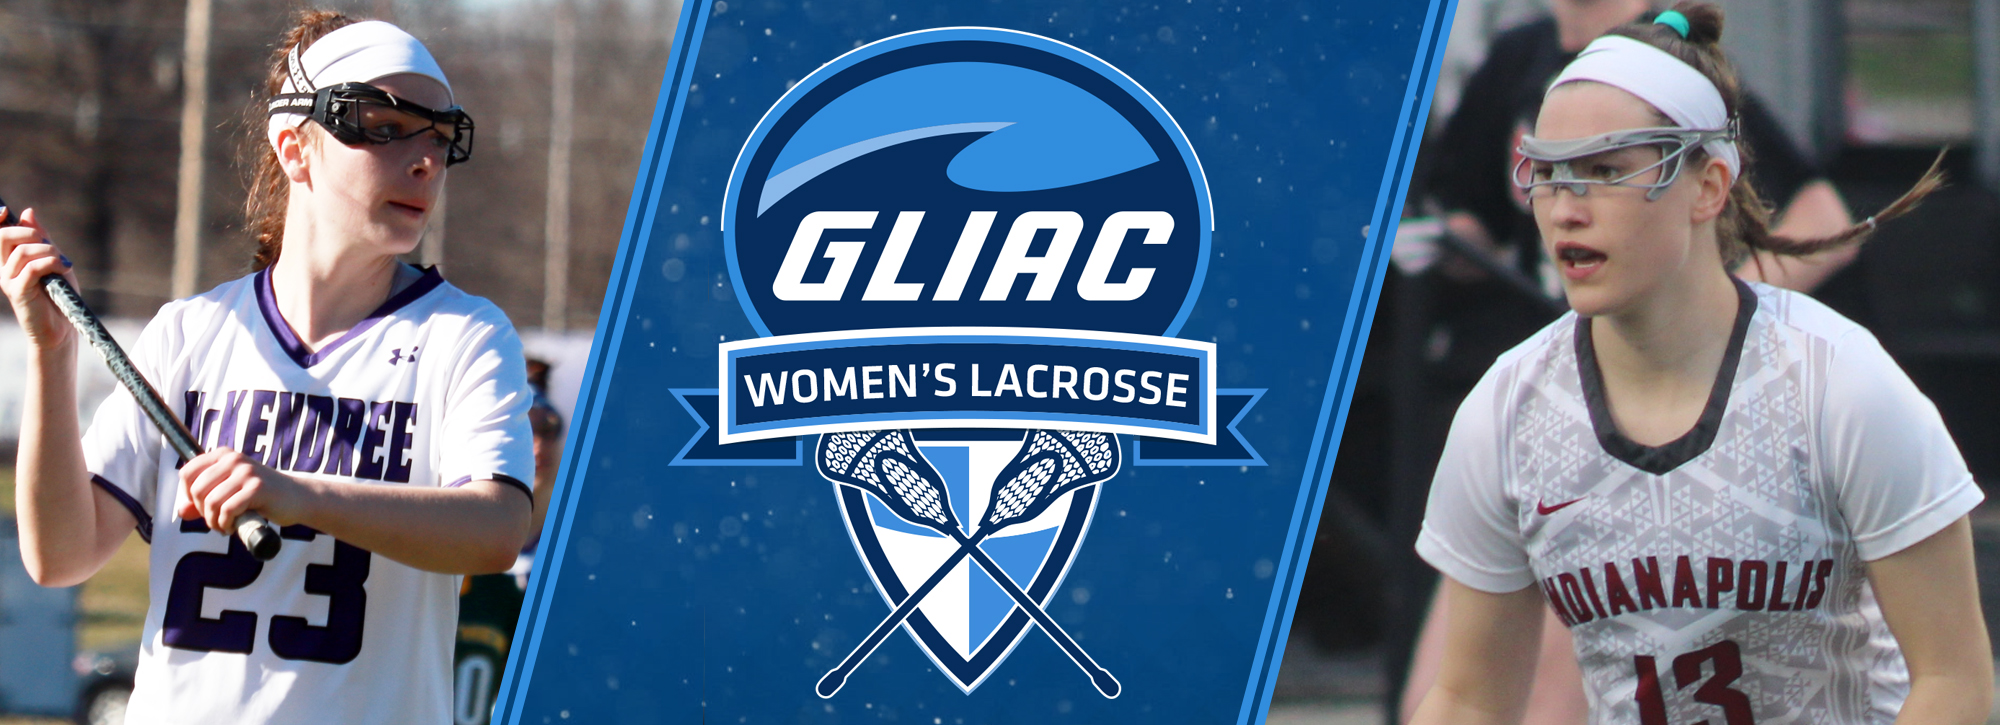 UIndy's Soenen and McKendree's Sugarman receive lacrosse player of the week awards